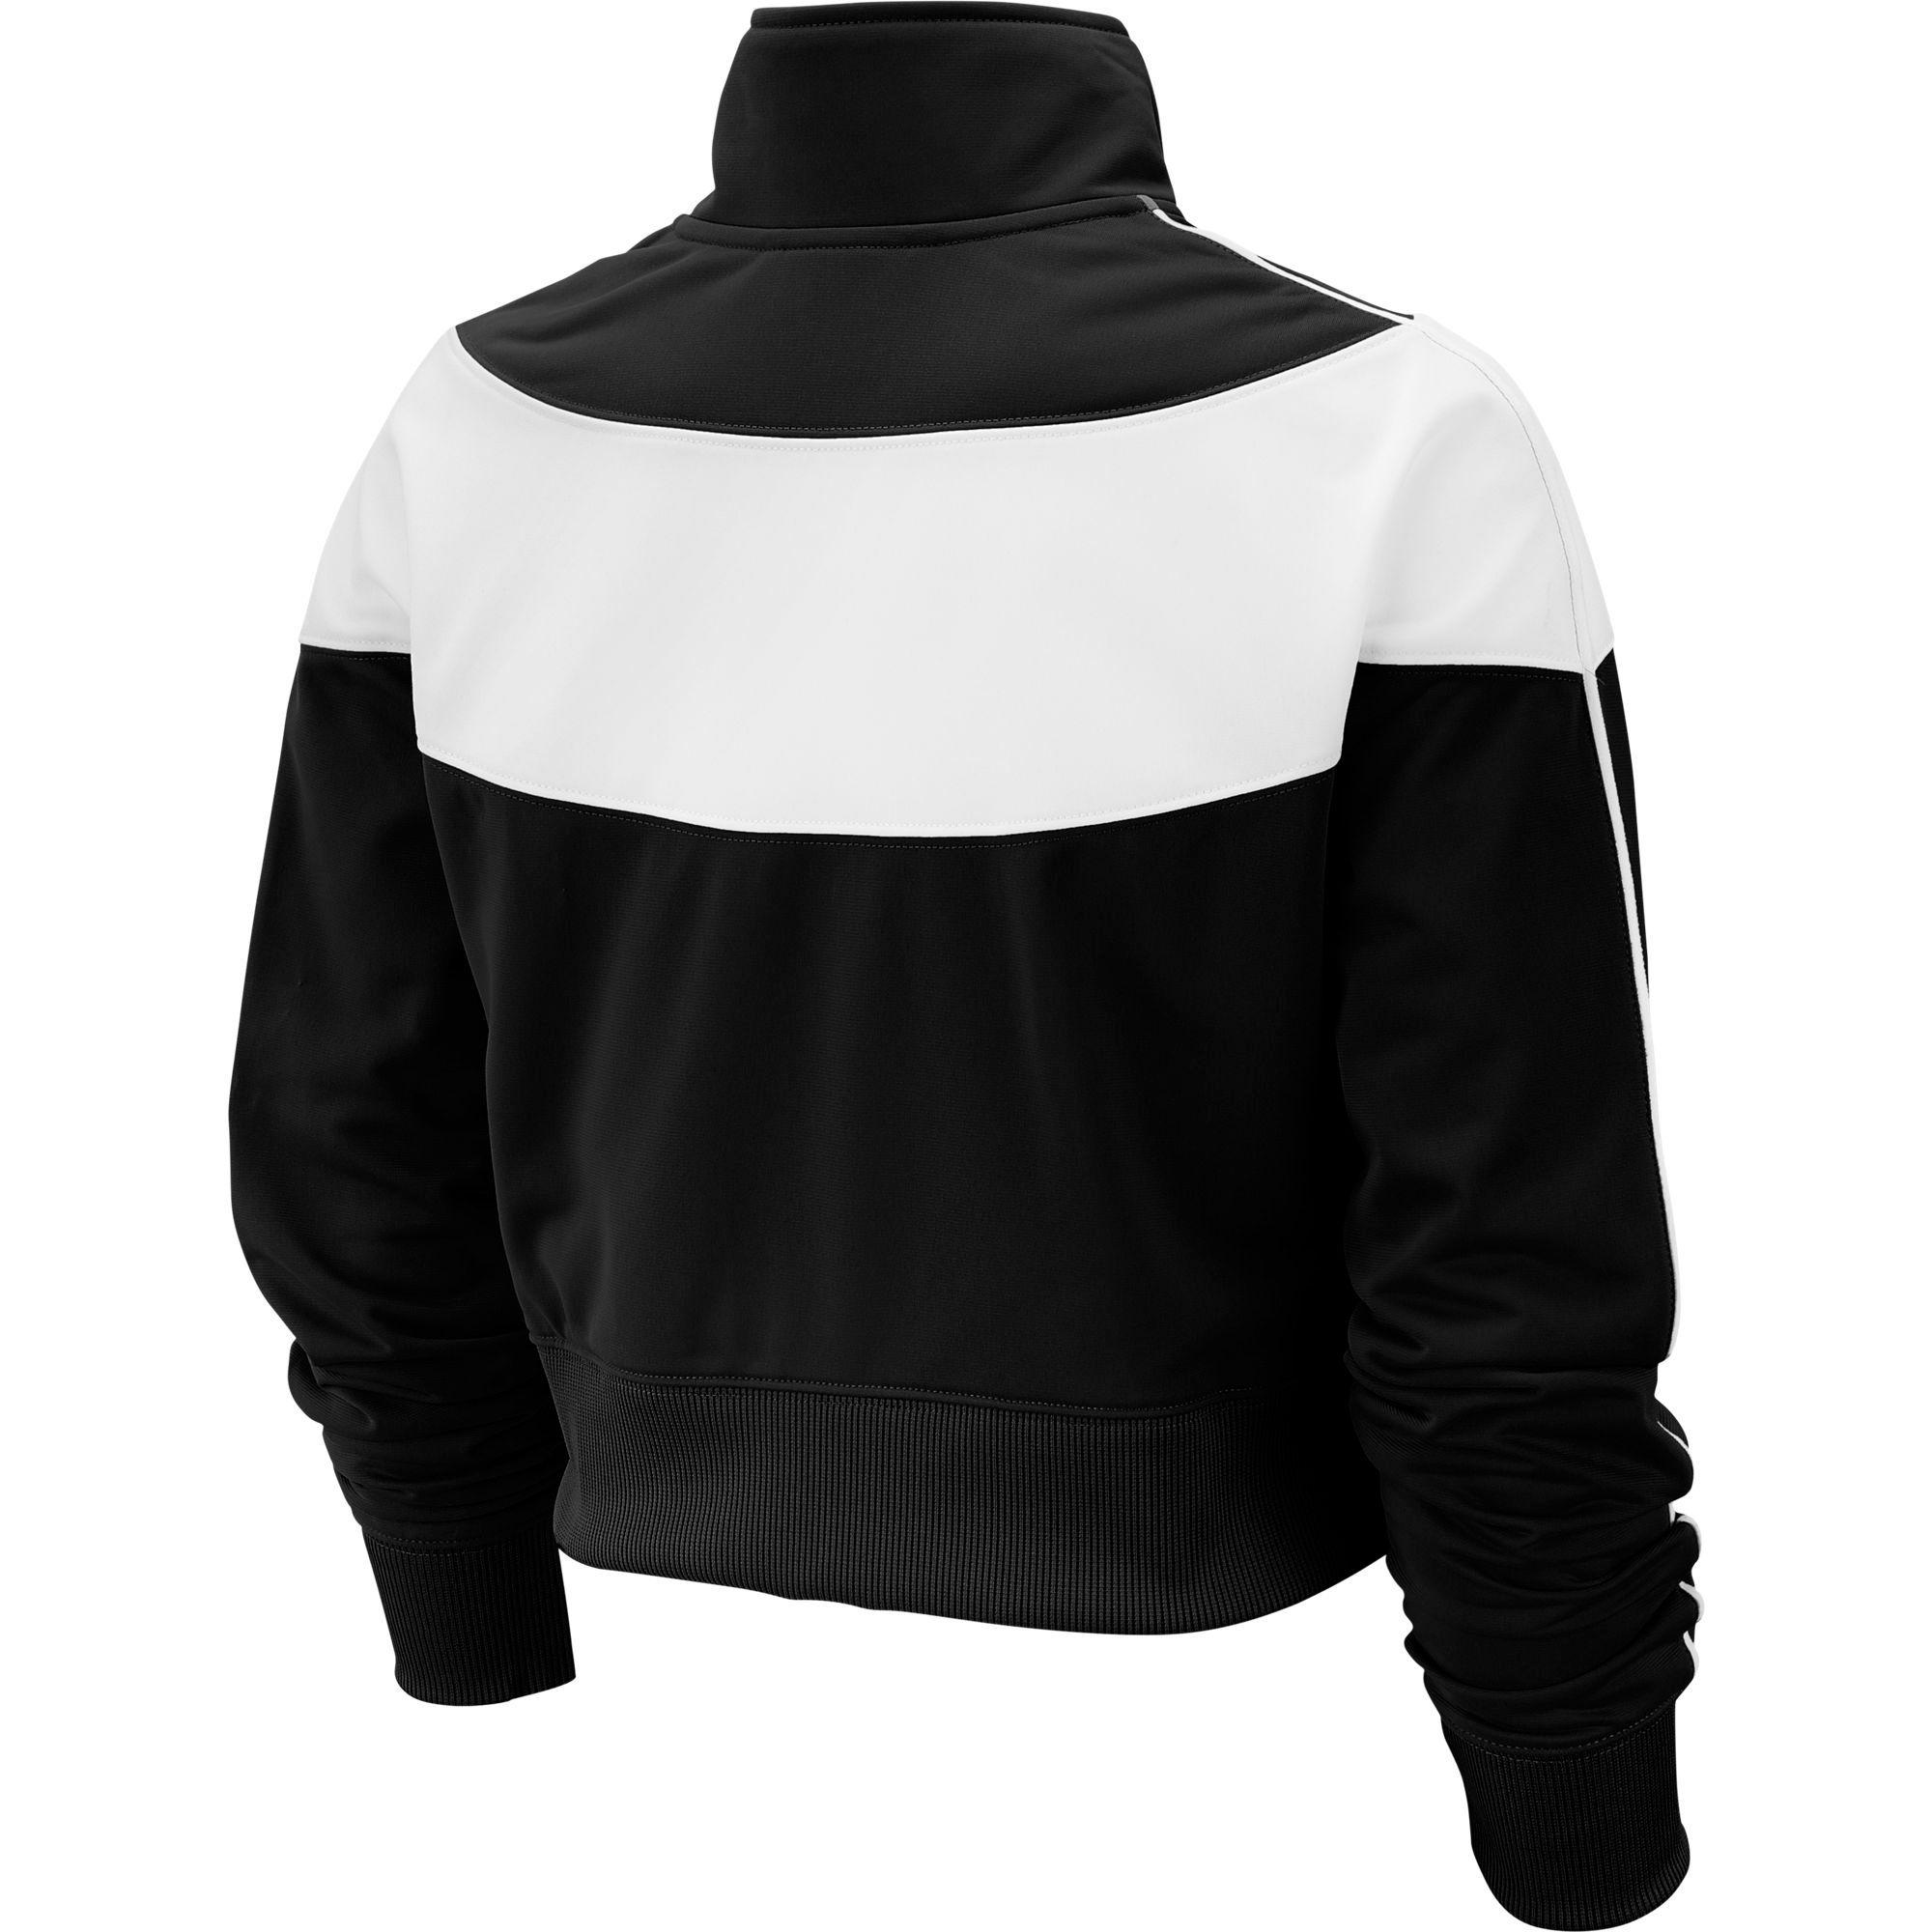 Nike Cotton Colorblock Cropped Track Jacket in Black / White (Black) - Lyst